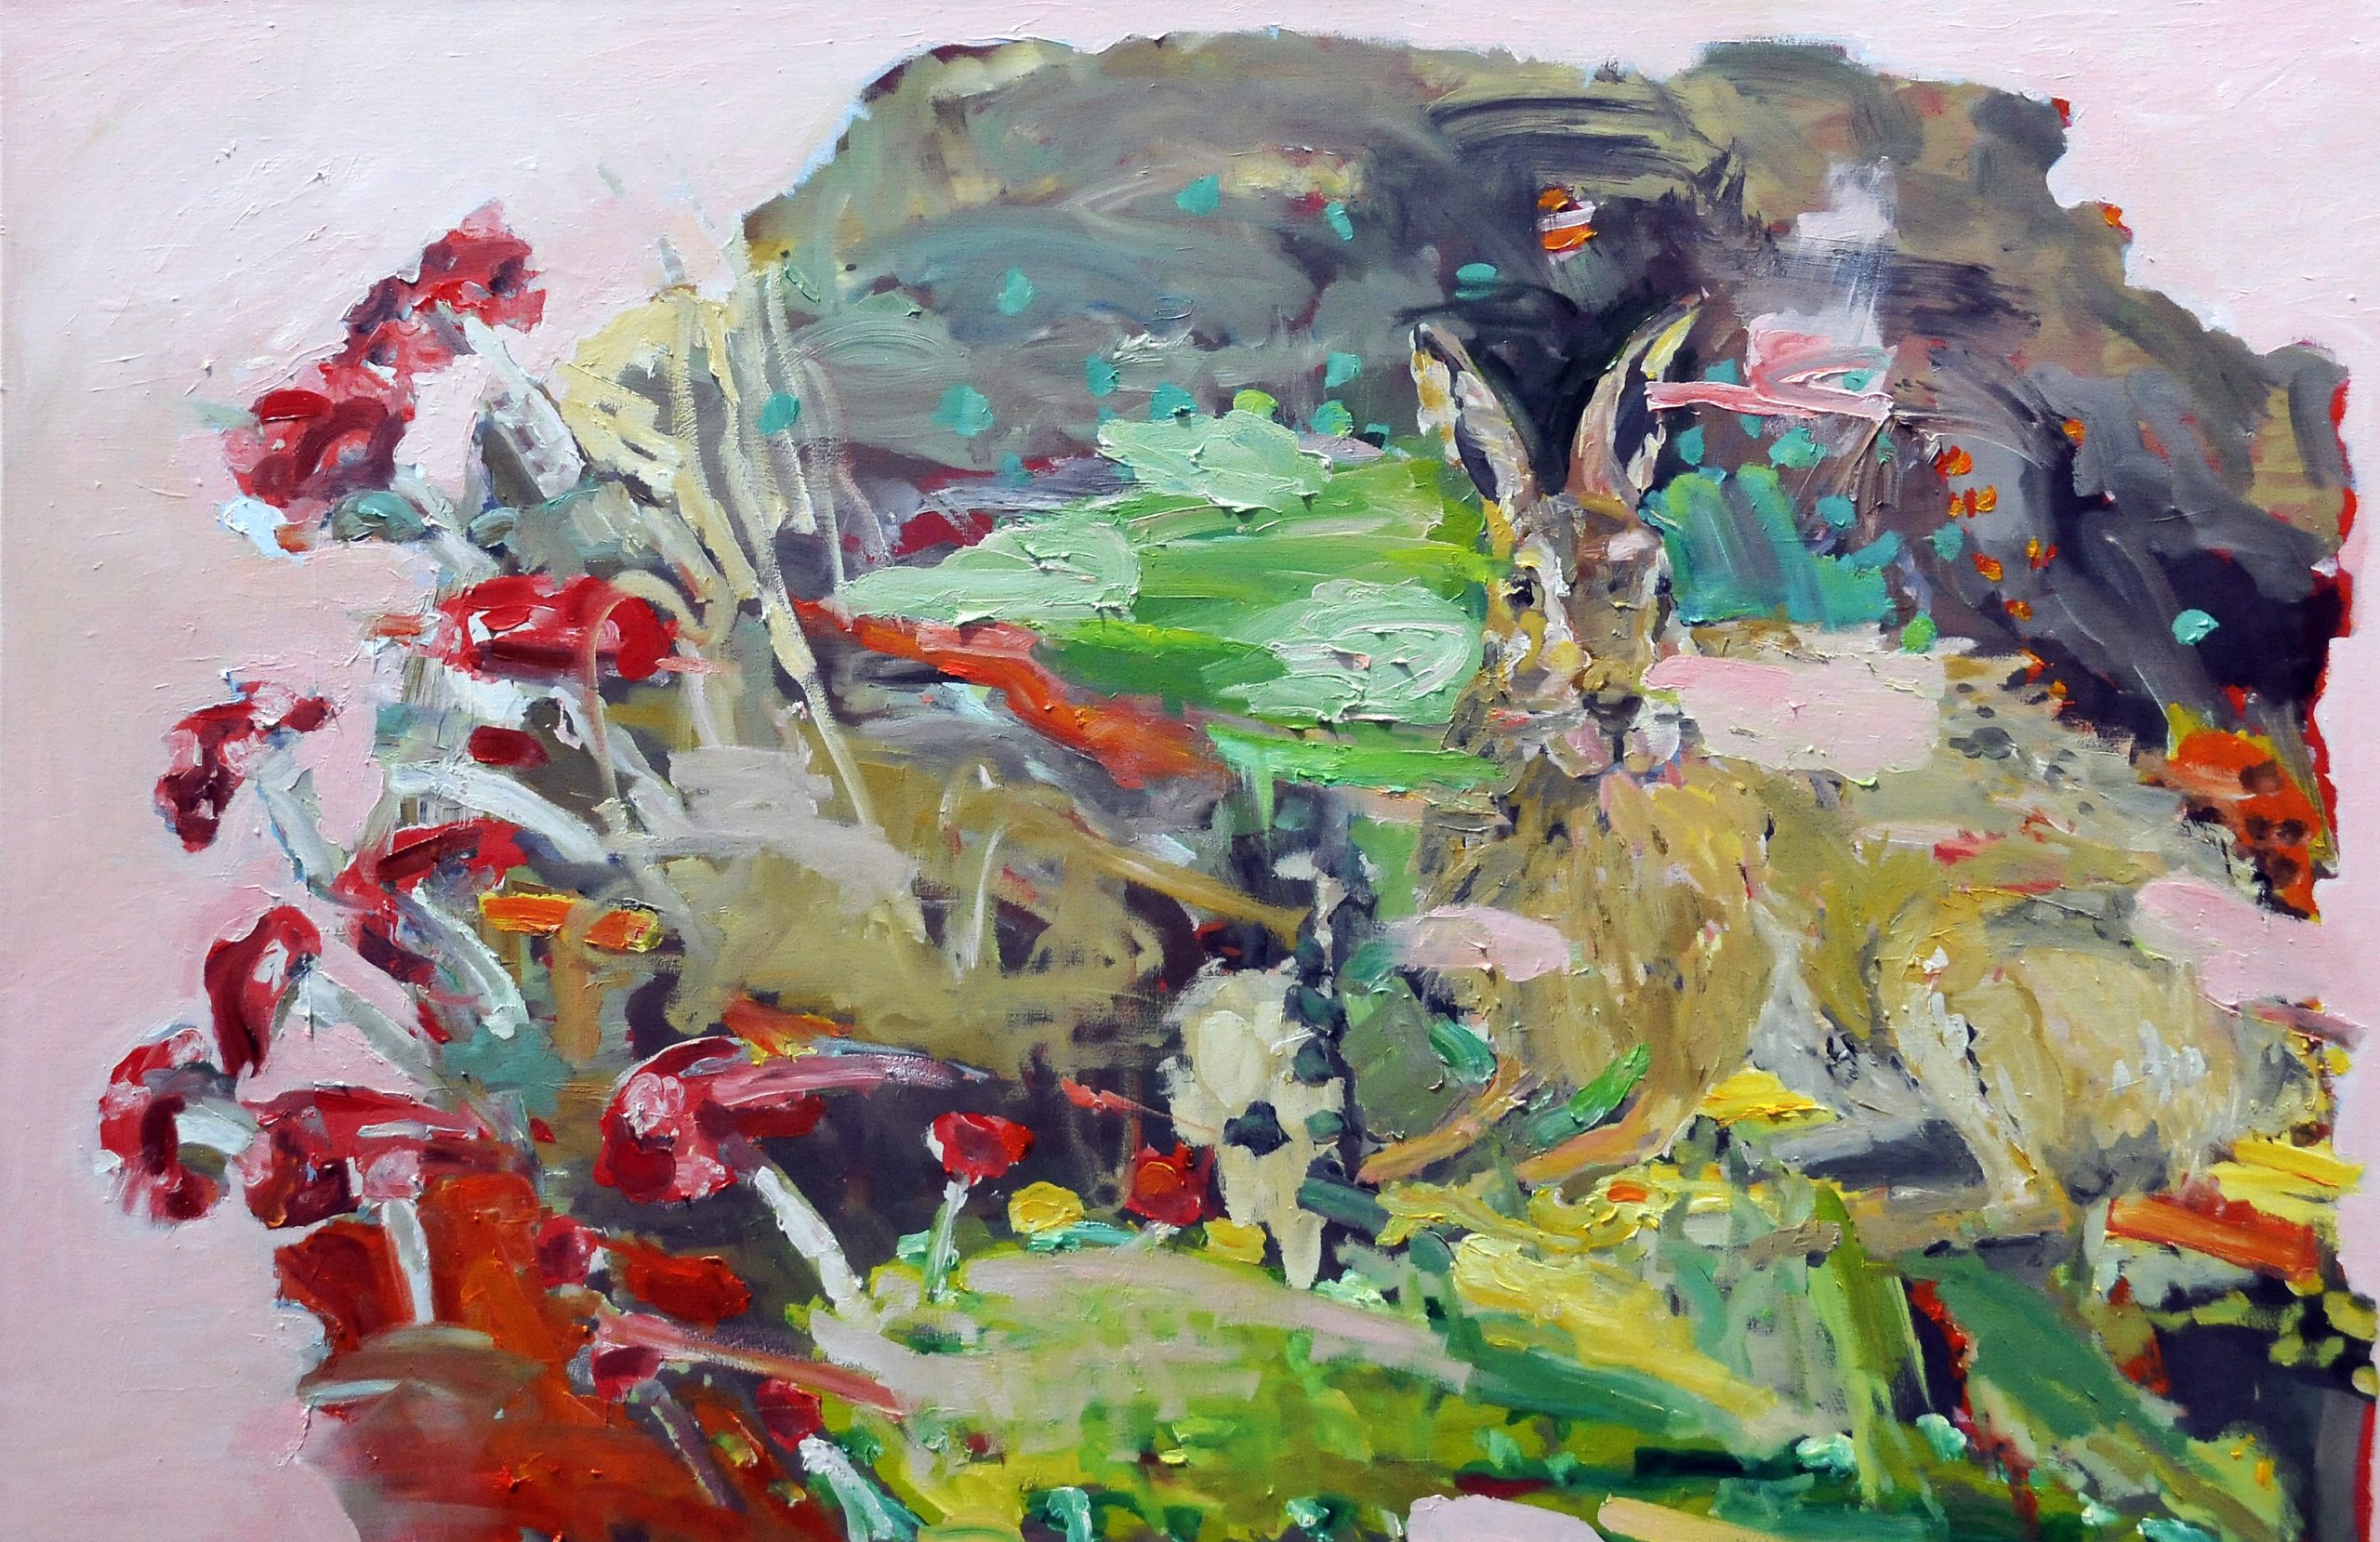 Genevieve Carroll 'The Paddock of Colour' oil and acrylic on canvas 86cm x 138cm $6,000 SOLD